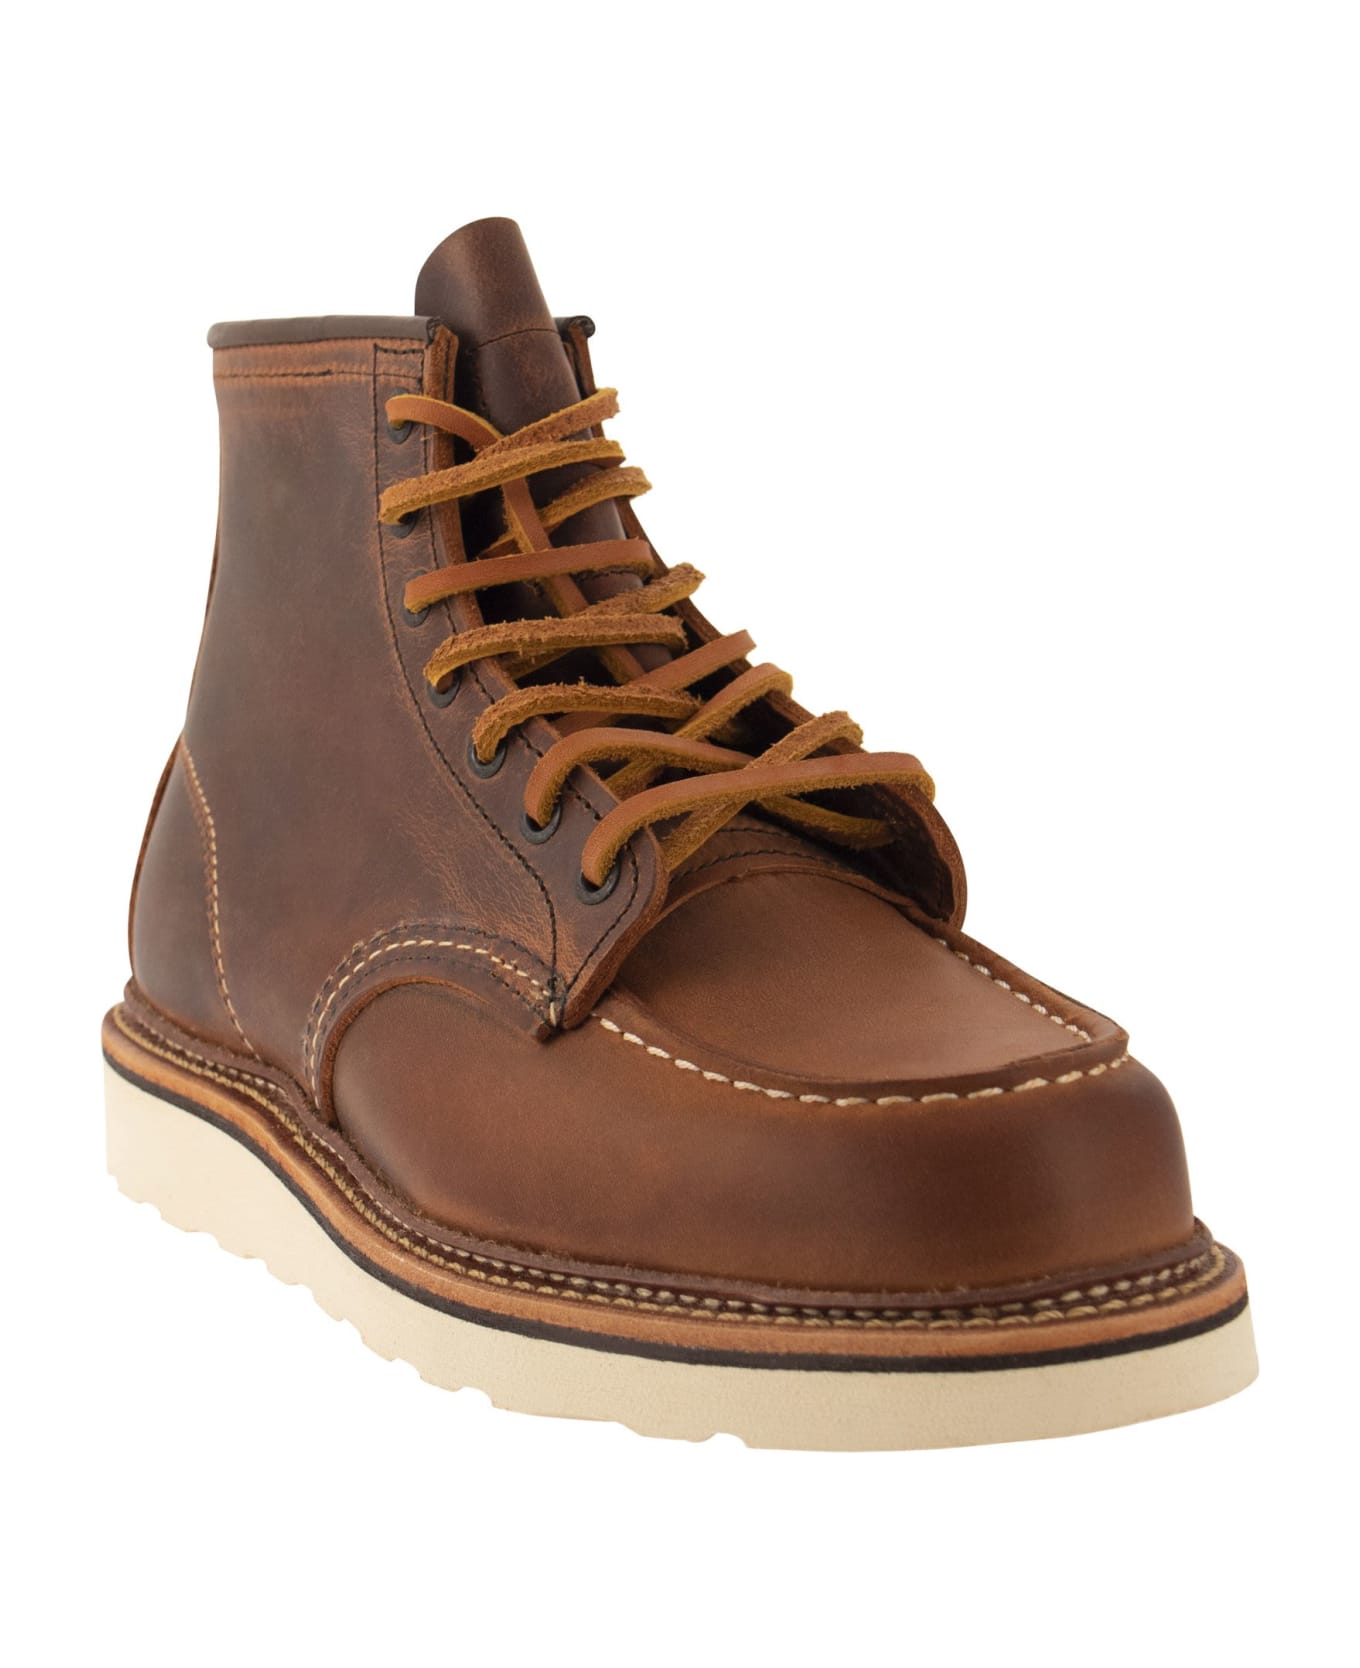 Red Wing Classic Moc - Rough And Tough Leather Boot - Copper